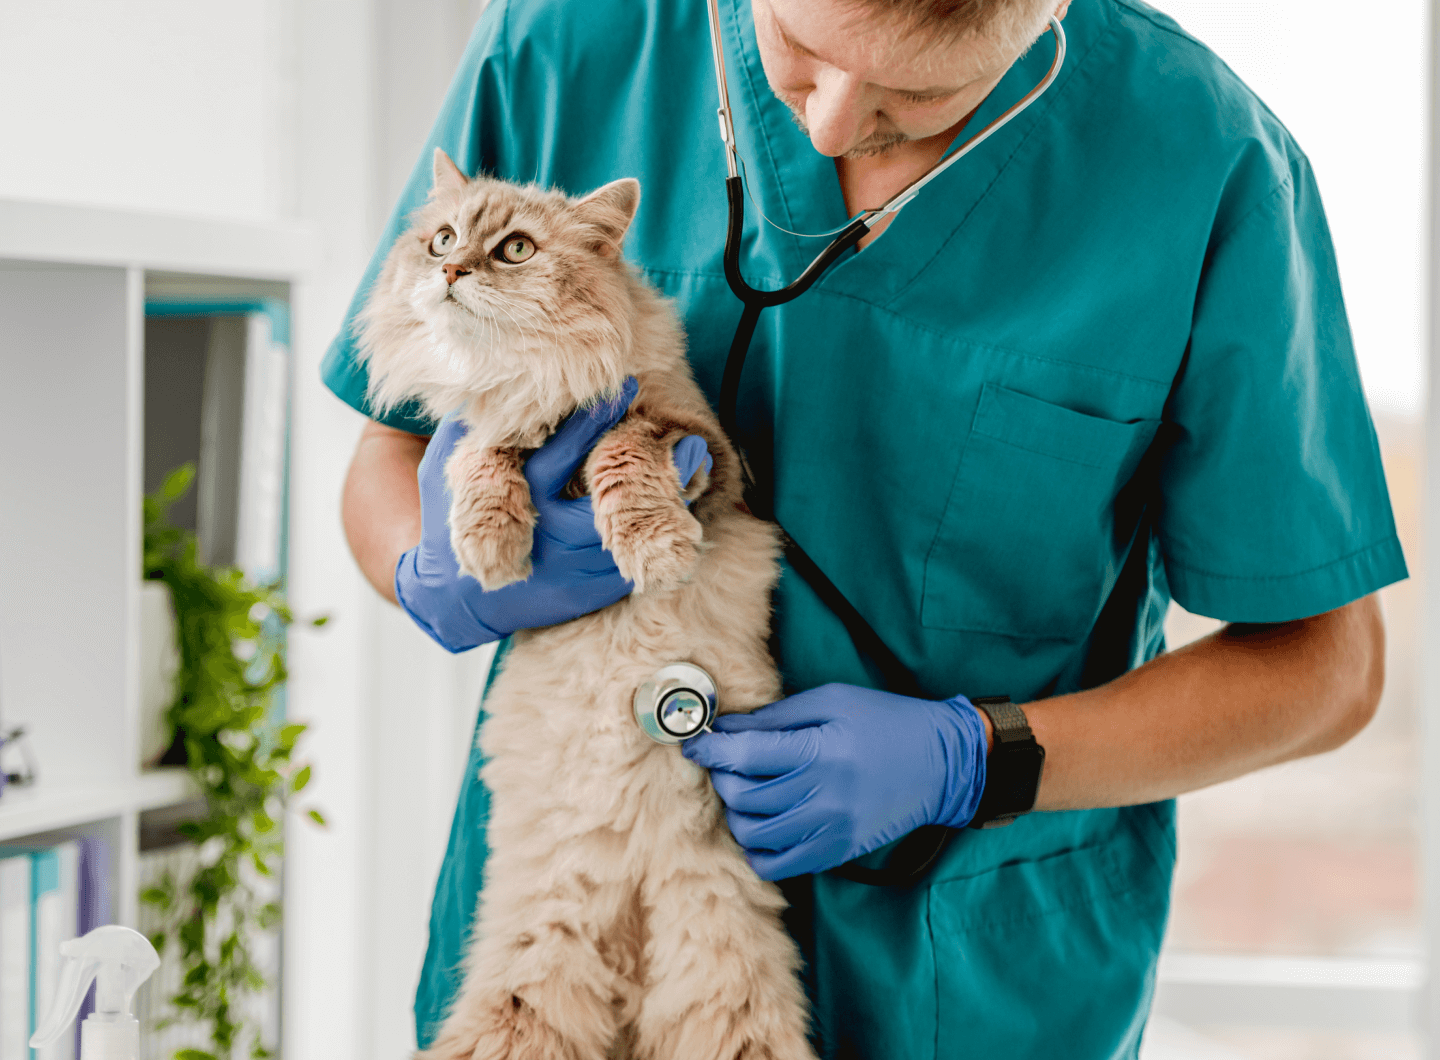 a person wearing scrubs and gloves holding a cat